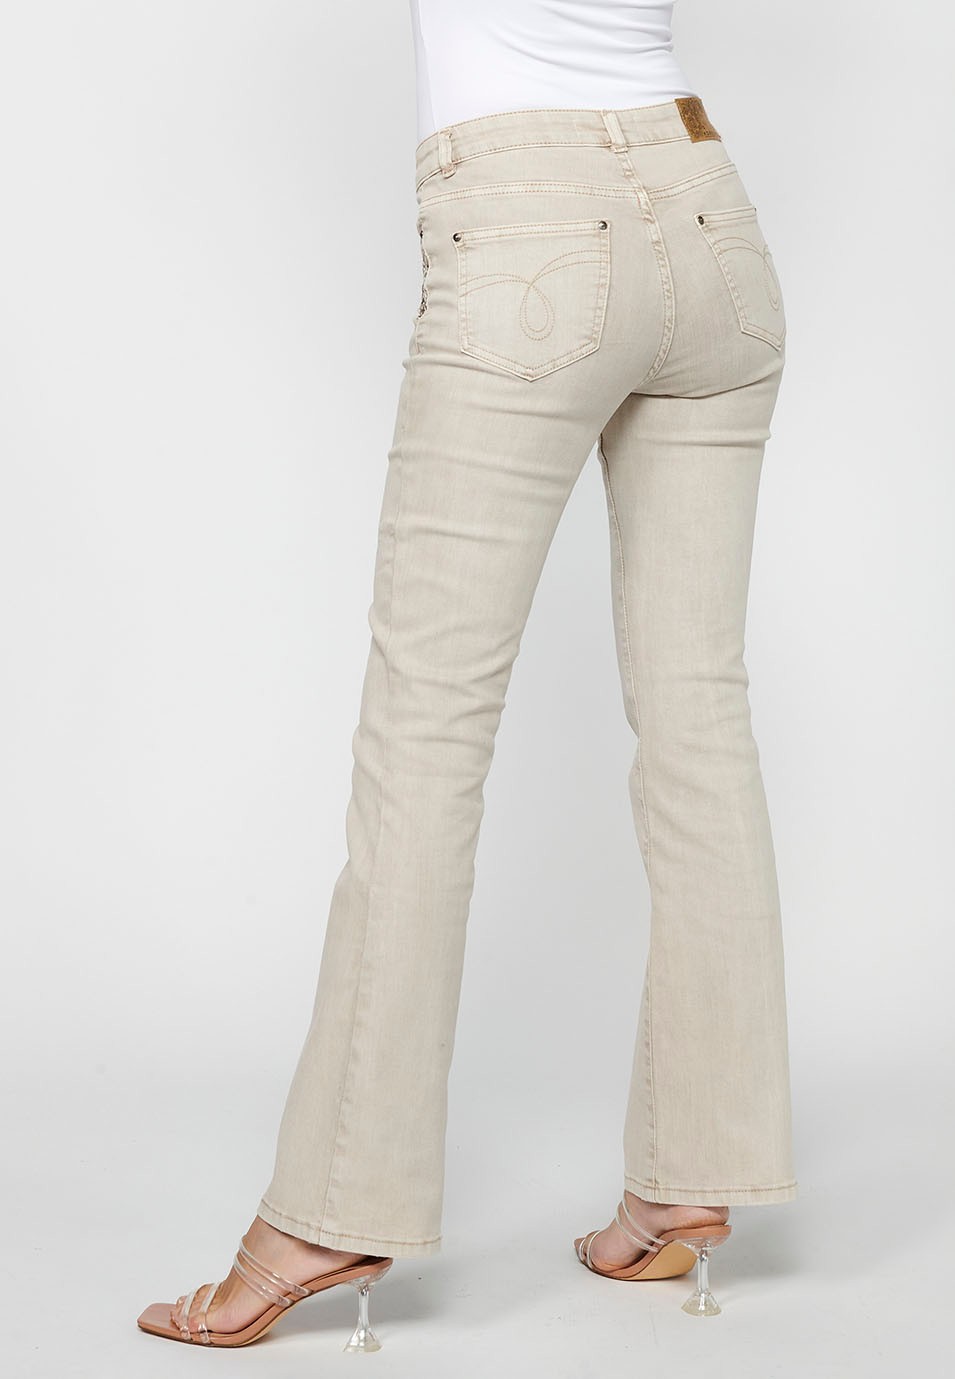 Long bell bottom pants with front zipper closure in Beige for Women 7